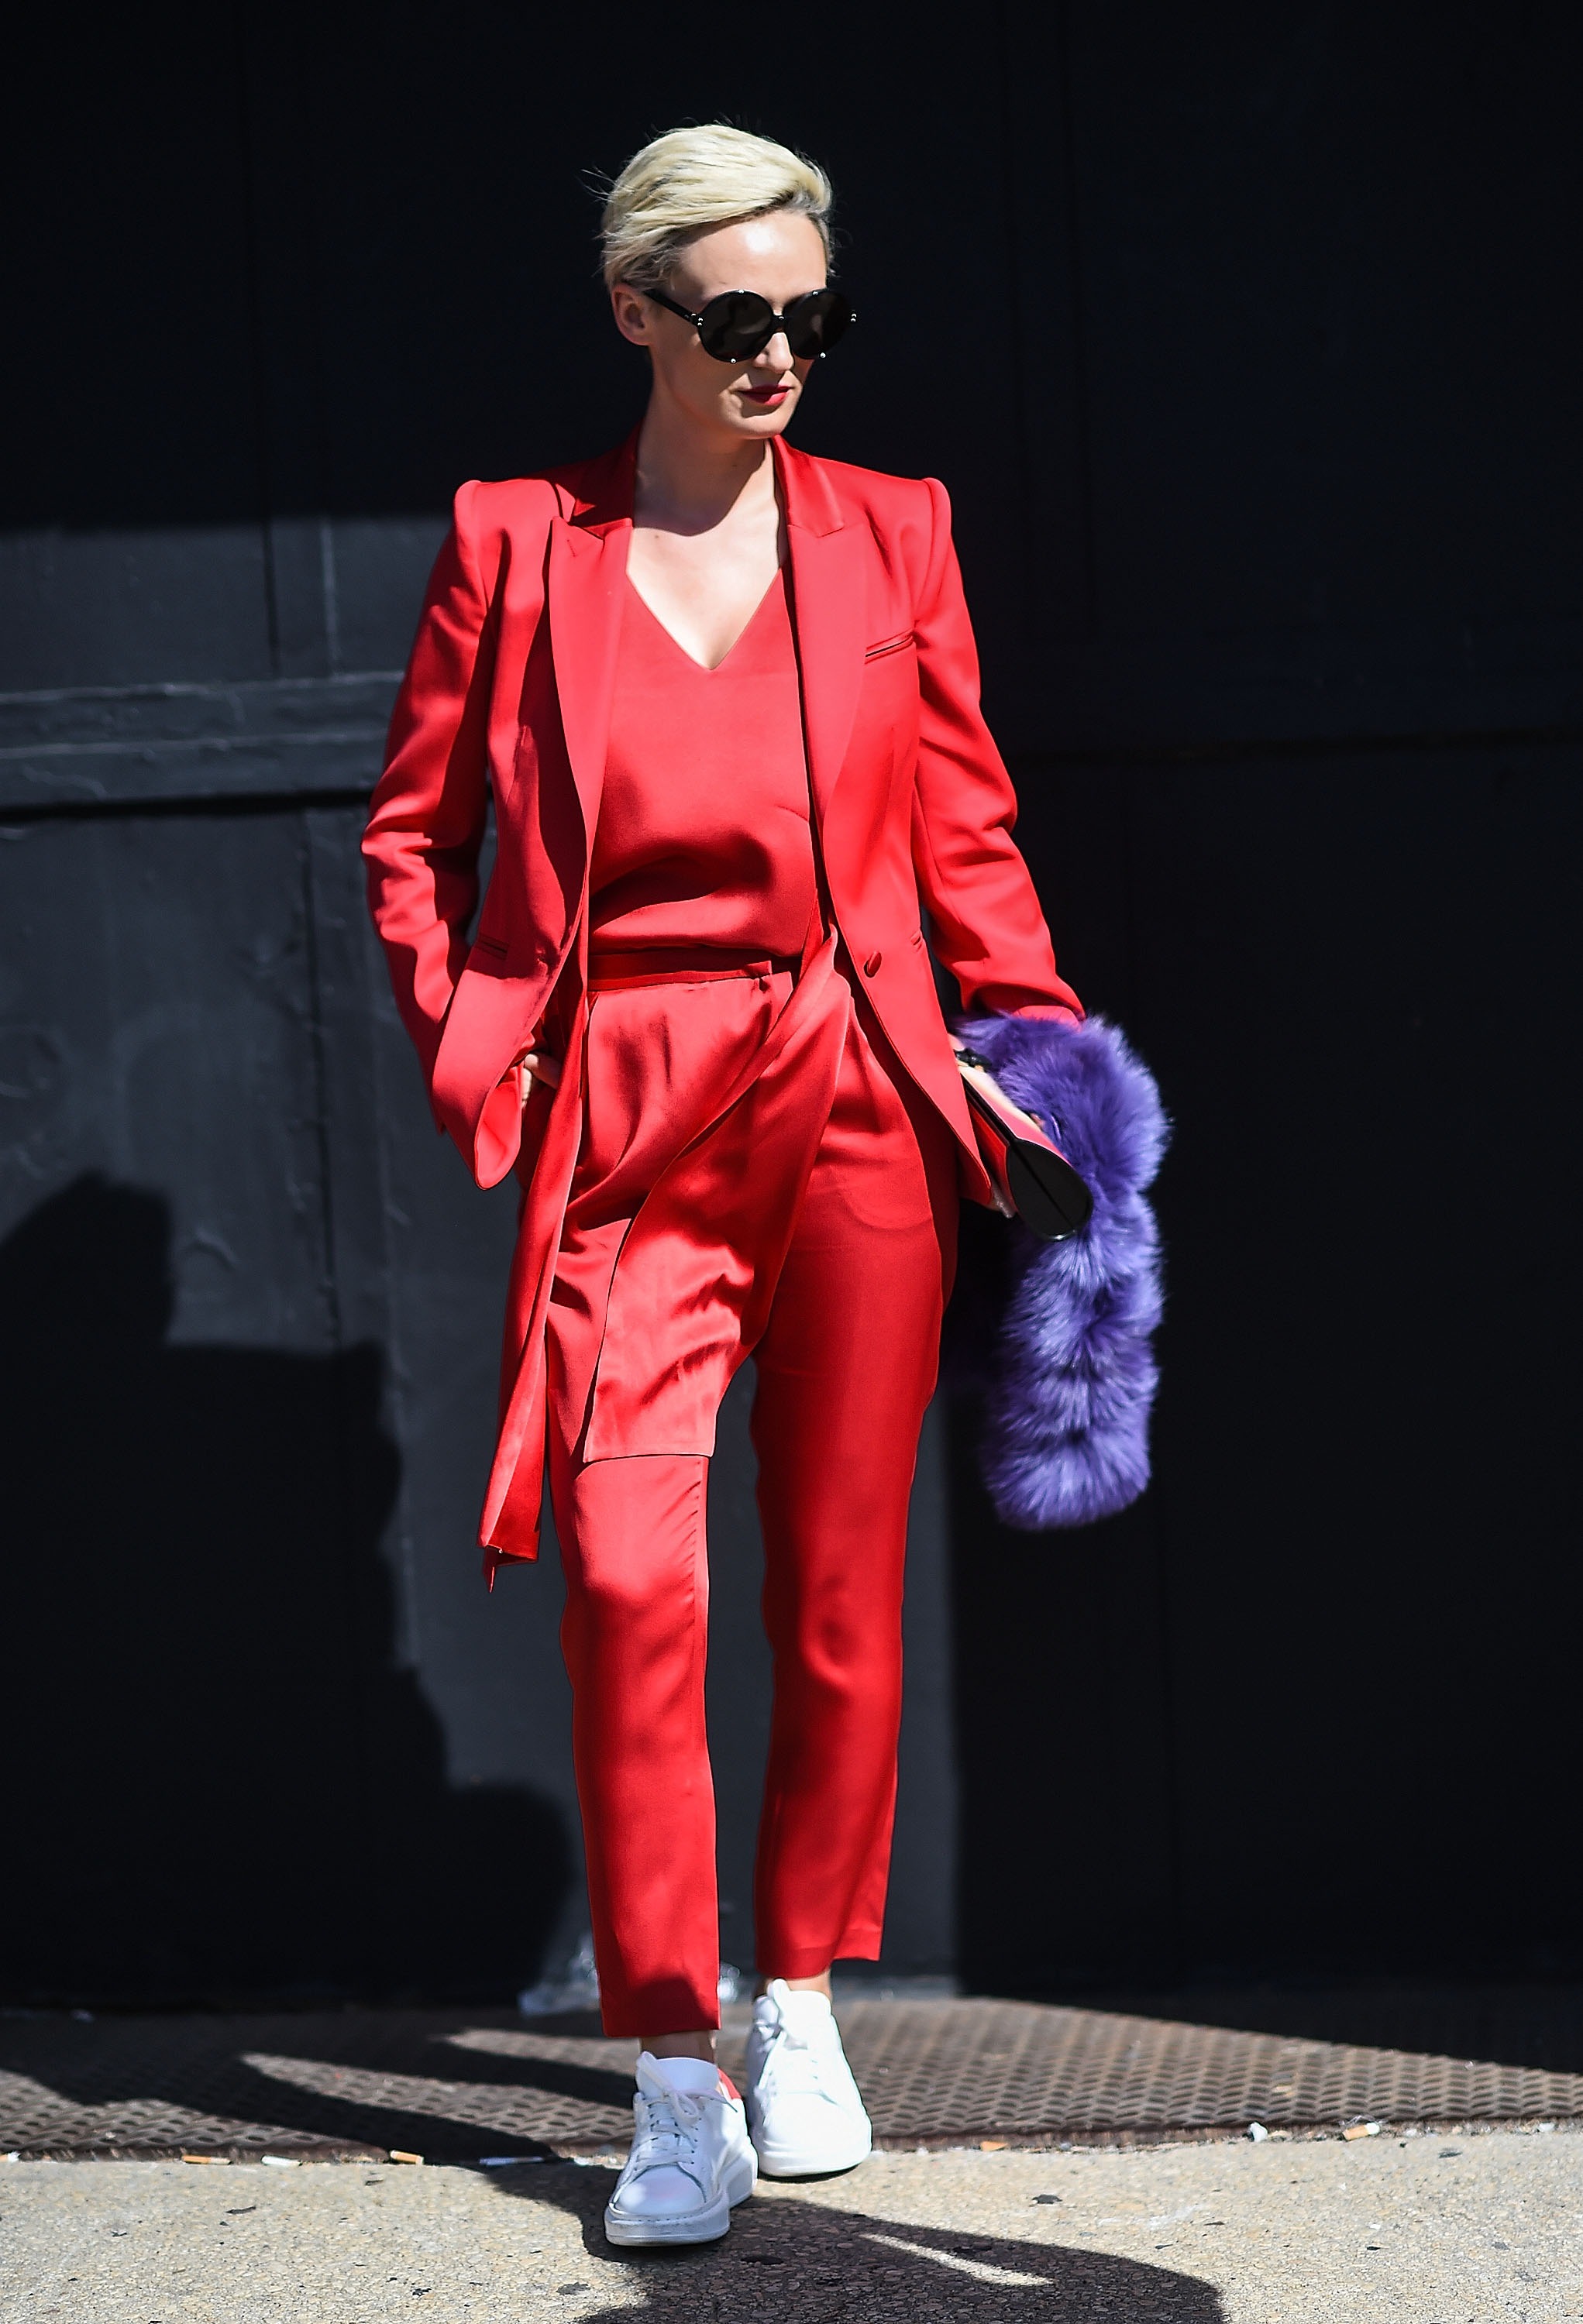 Monochromatic: Head-to-toe colorways reigned on the street-style scene this season. Bold hues and sleek silhouettes ensure that this trend will help you stand out, no matter what the occasion.